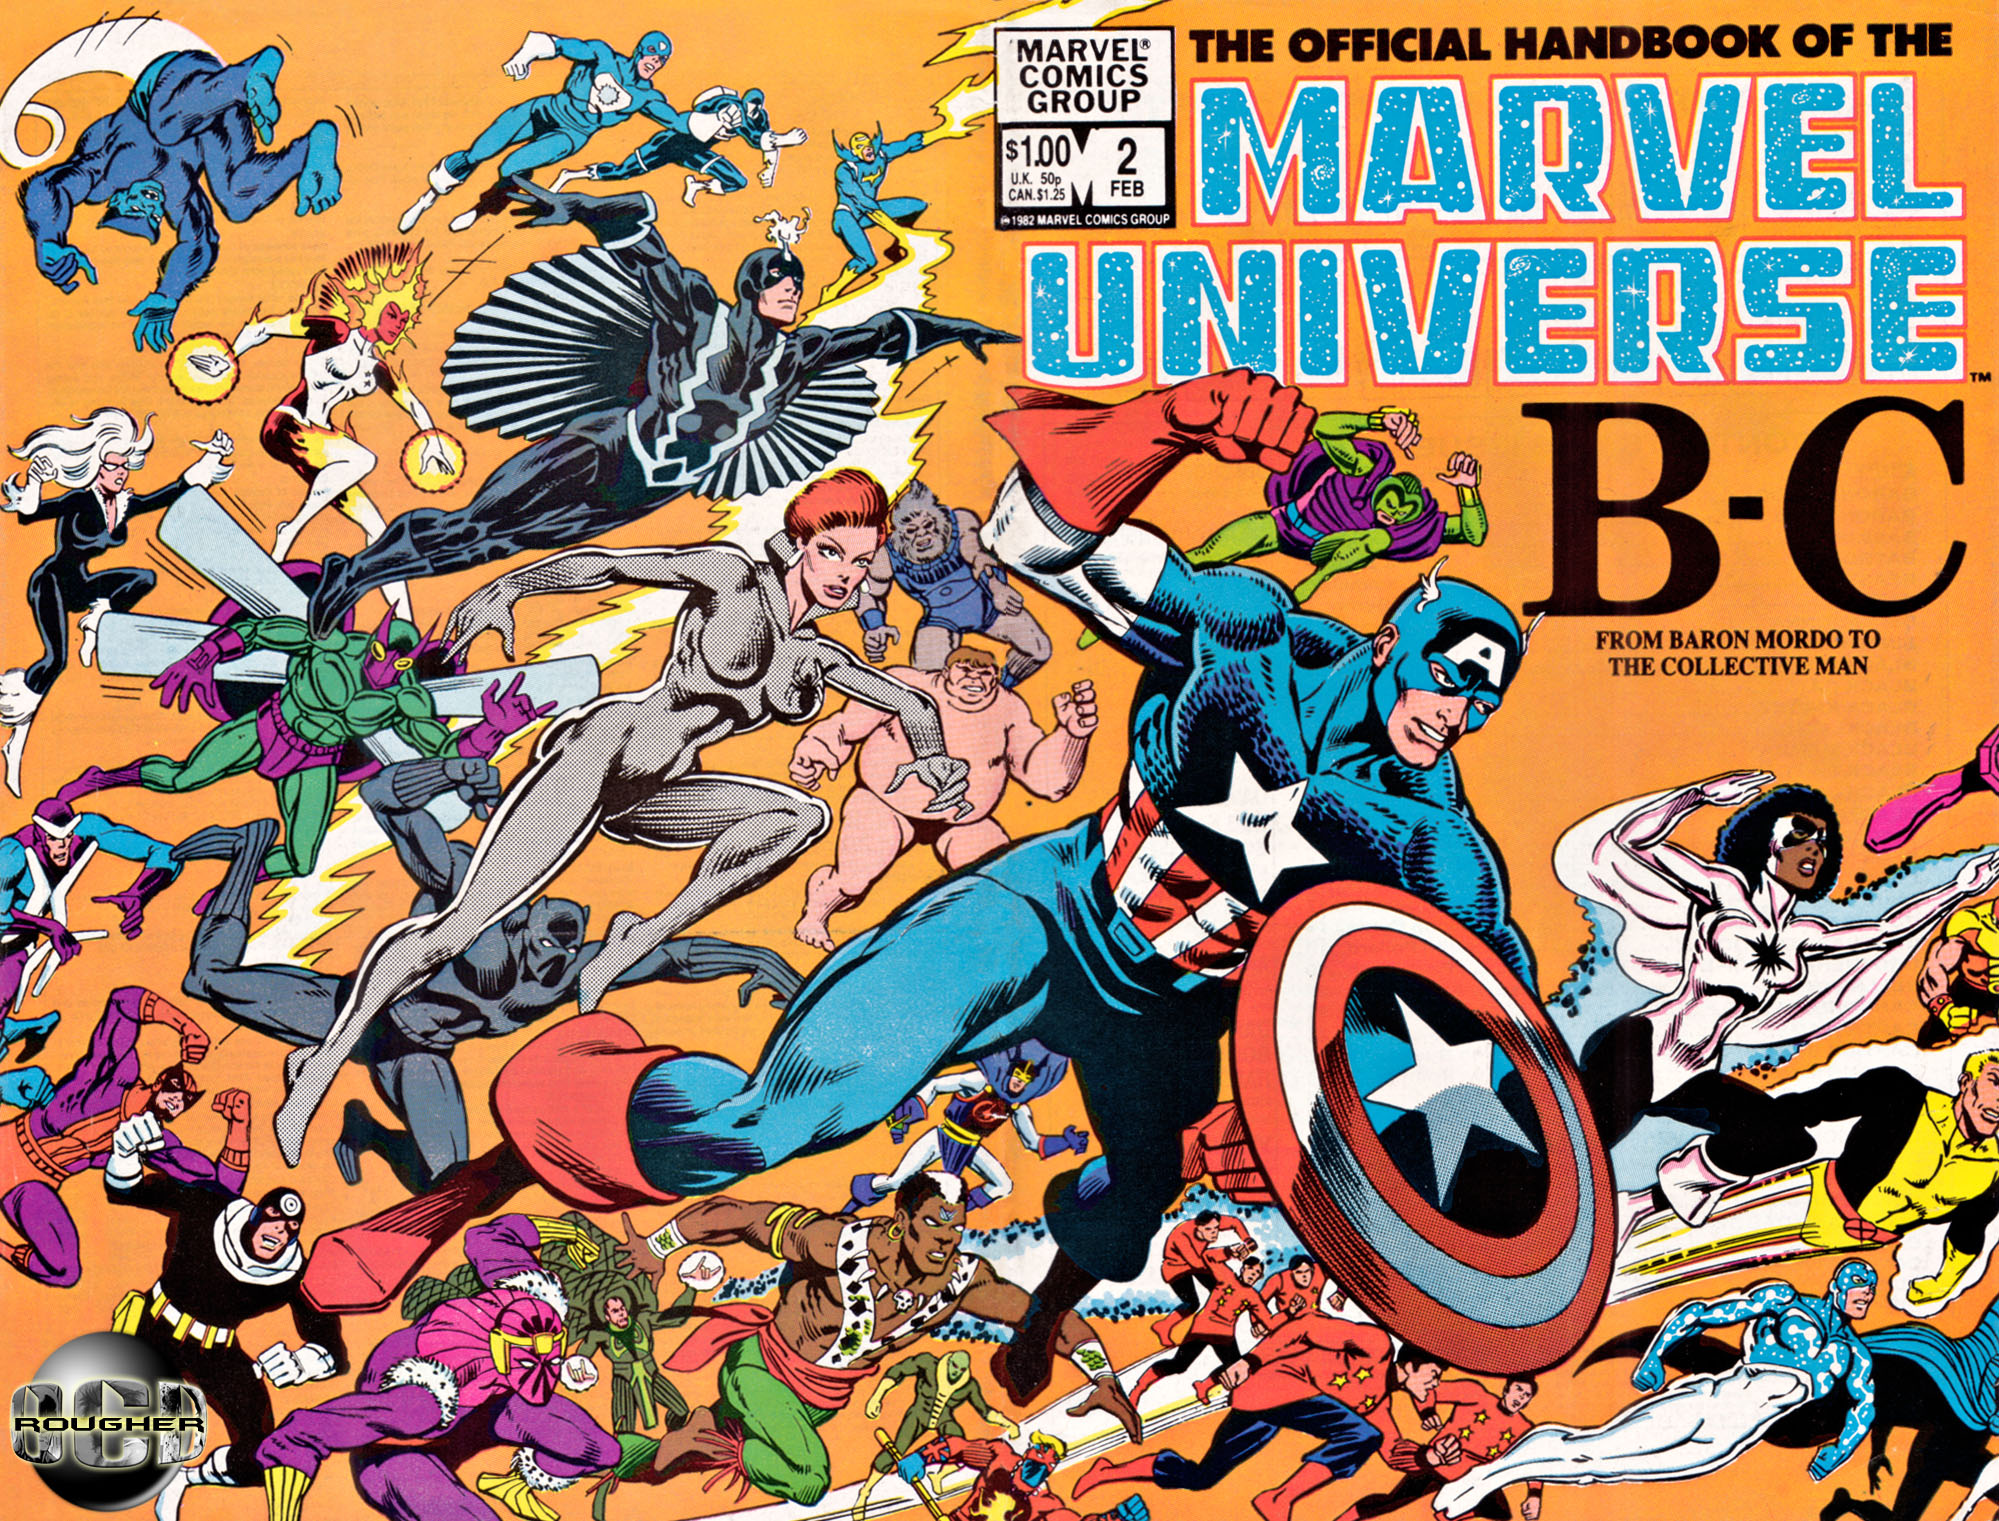 Read online The Official Handbook of the Marvel Universe comic -  Issue #2 - 1